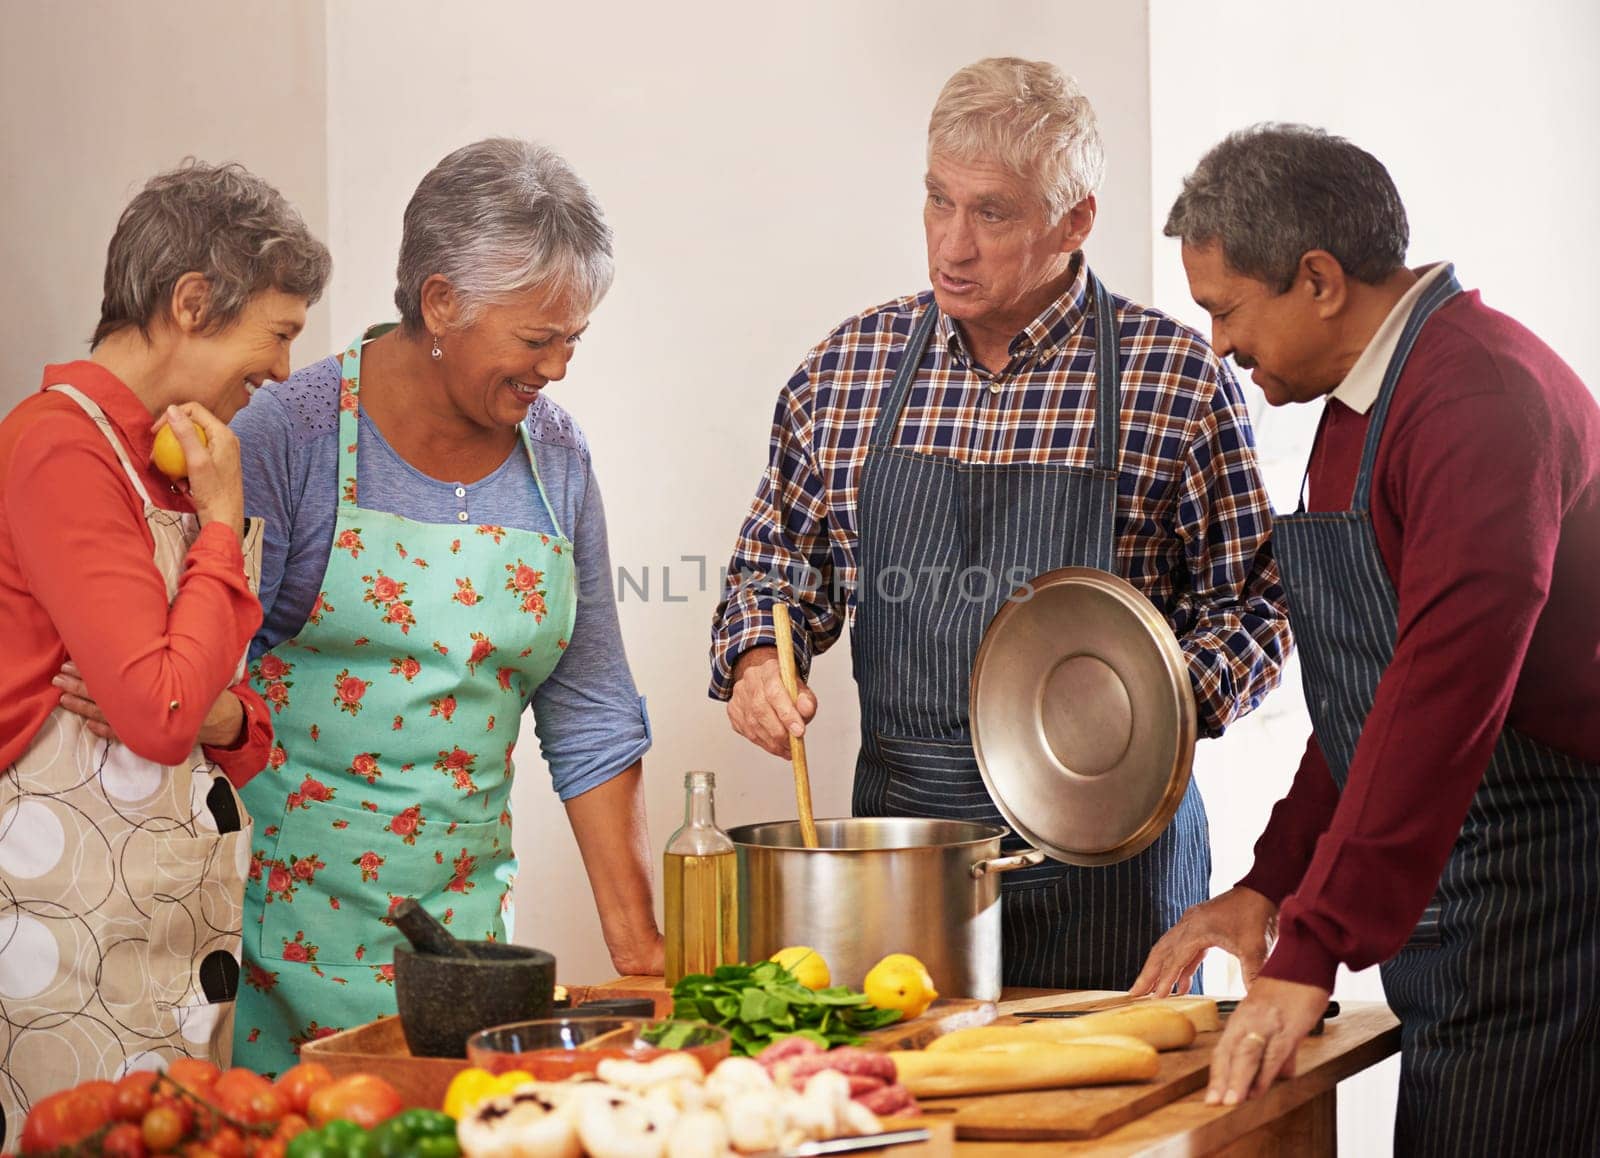 Cooking class, chef or senior friends in kitchen for fun, bonding or meal prep for reunion, birthday or weekend dish in house. Diet, nutrition or old people learning traditional food, pasta or recipe.